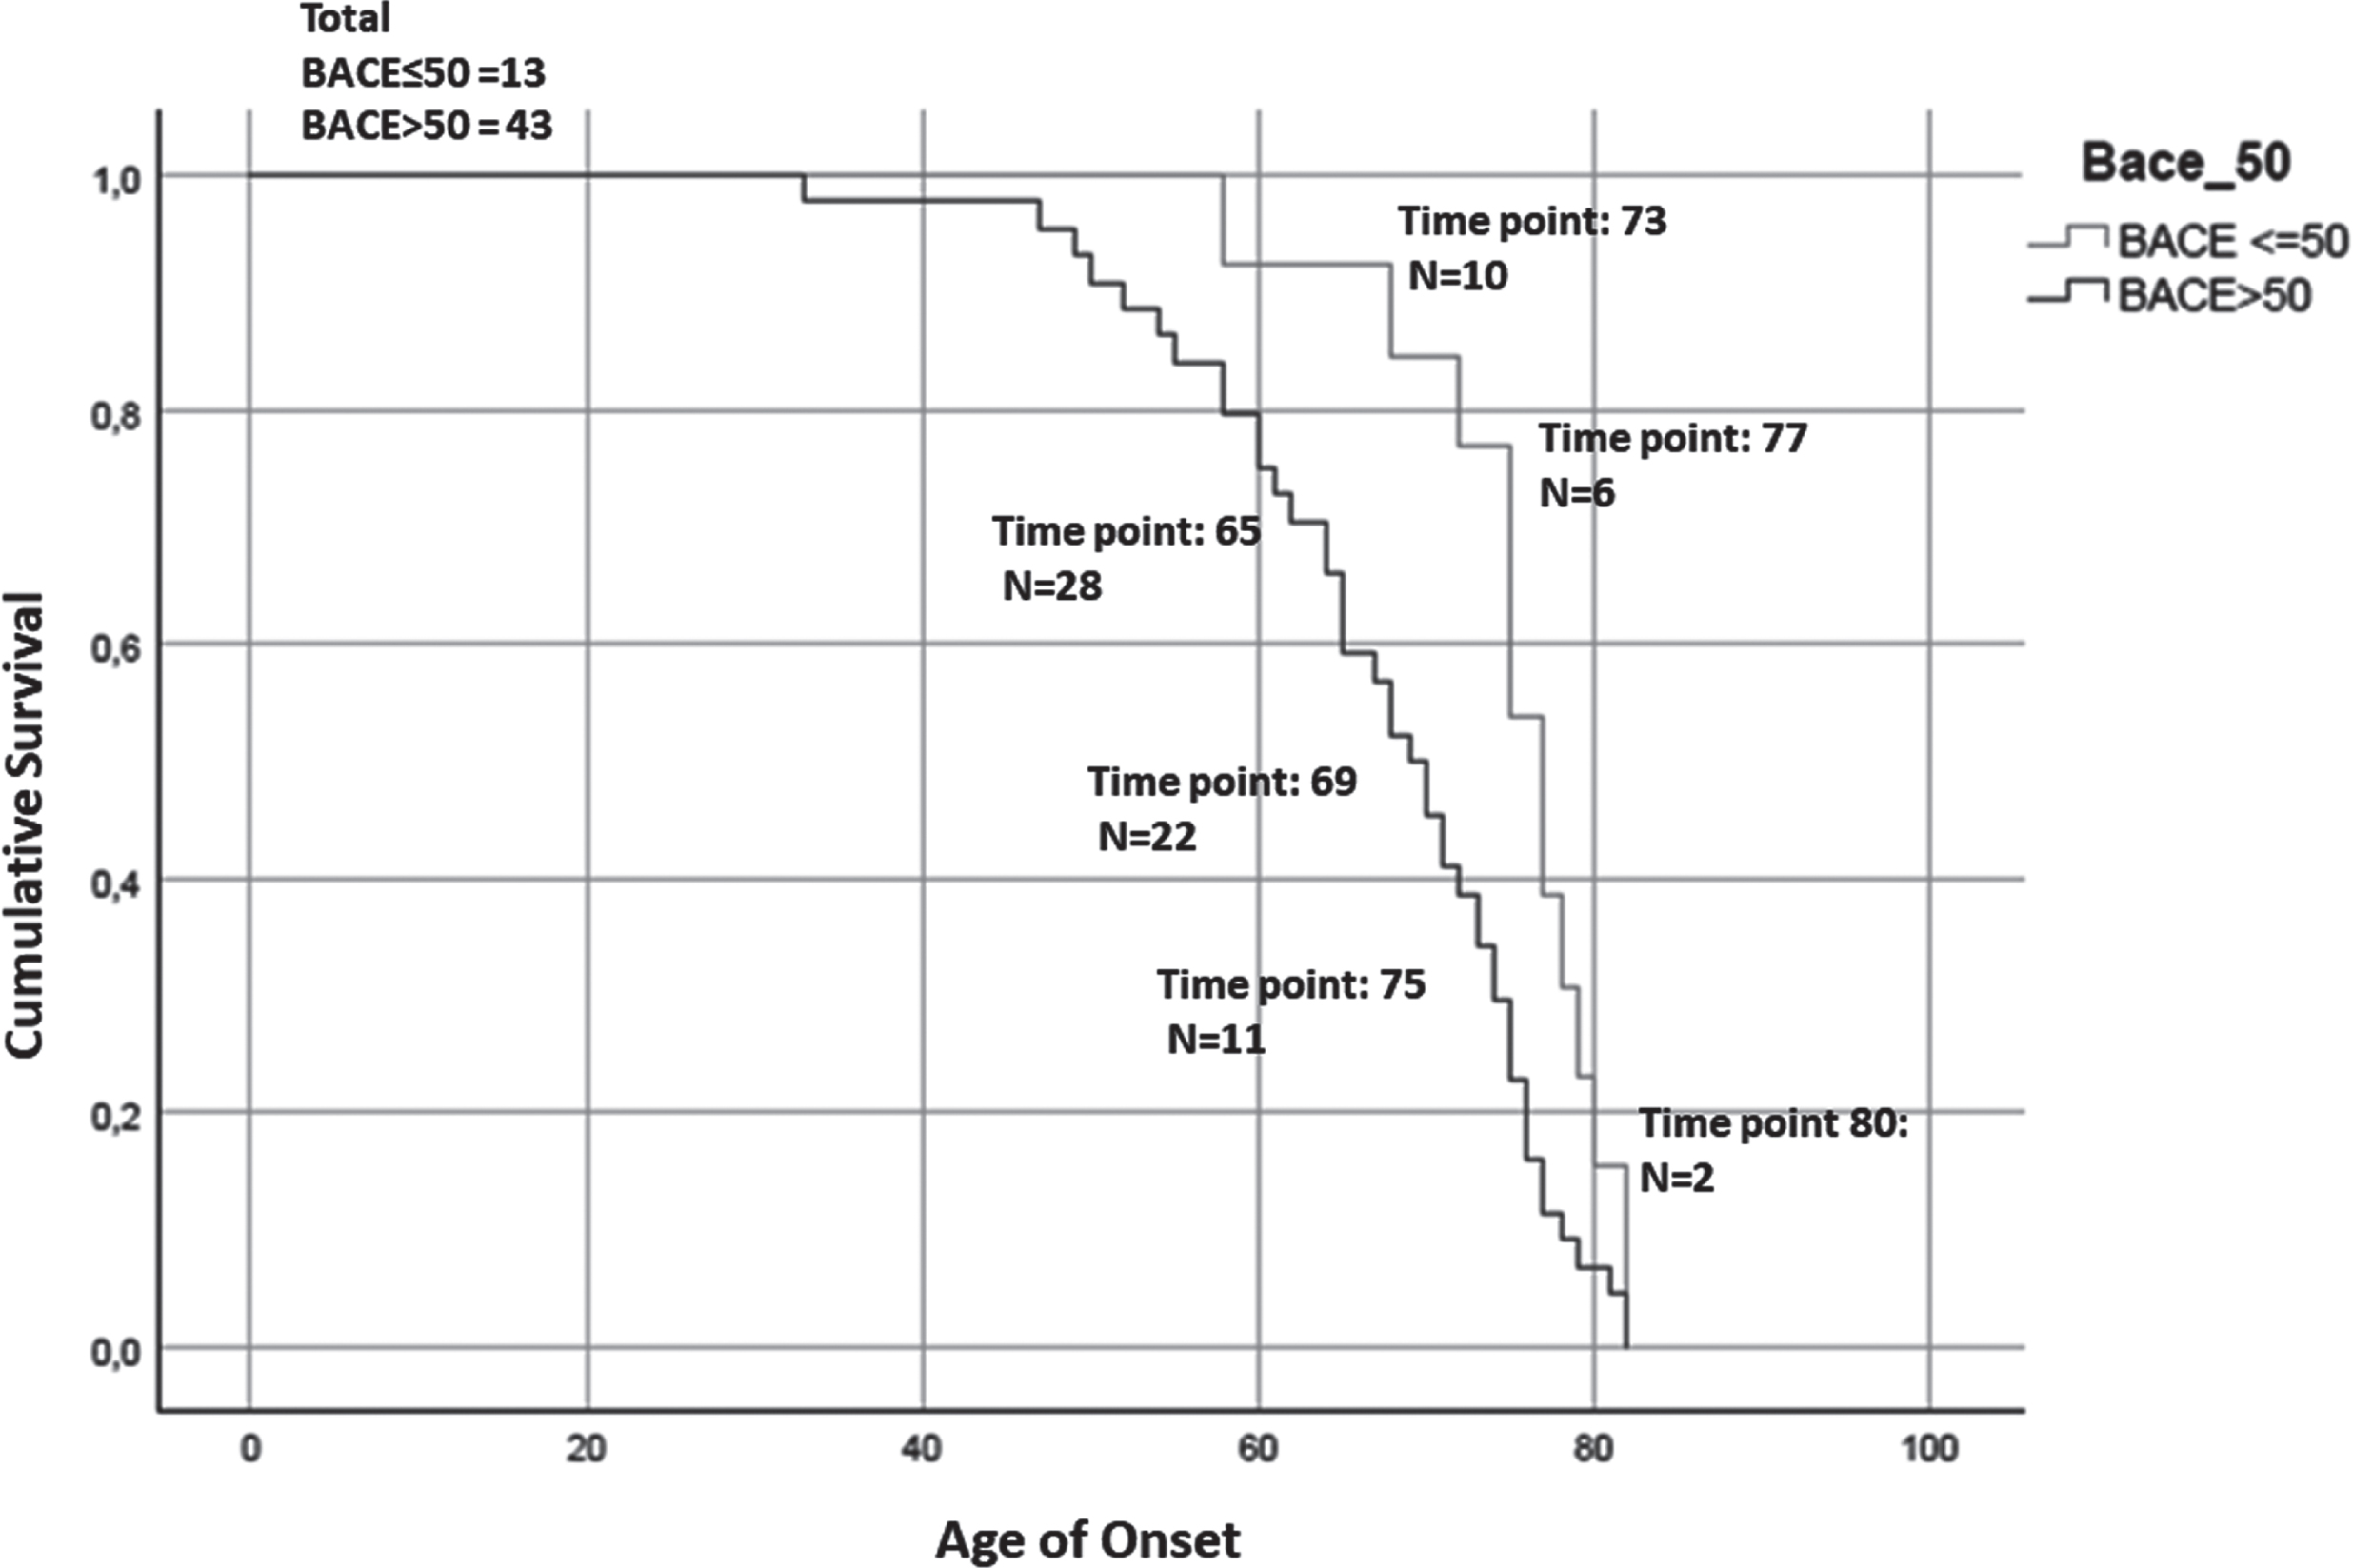 Kaplan-Meier survival curve. For the analysis has been considered the age of onset for AD patients and the age of conversion for the MCI-AD. The number of subjects at risk respectively at: the 25% percentile, median, and 75% percentile of Median time for each group are reported. The test showed that patients with higher serum levels of BACE1 (of the median (16.67 kU/L): BACE > 50) anticipate the pathology of 8 years (77 > 69, p = 0.008, Breslow test, BACE < = 50 group: Median time = 77; 25% Percentile = 73.56; 75% Percentile = 80.44; BACE > 50 group: Median time = 69; 25% Percentile = 65.28; 75% Percentile = 72.71).